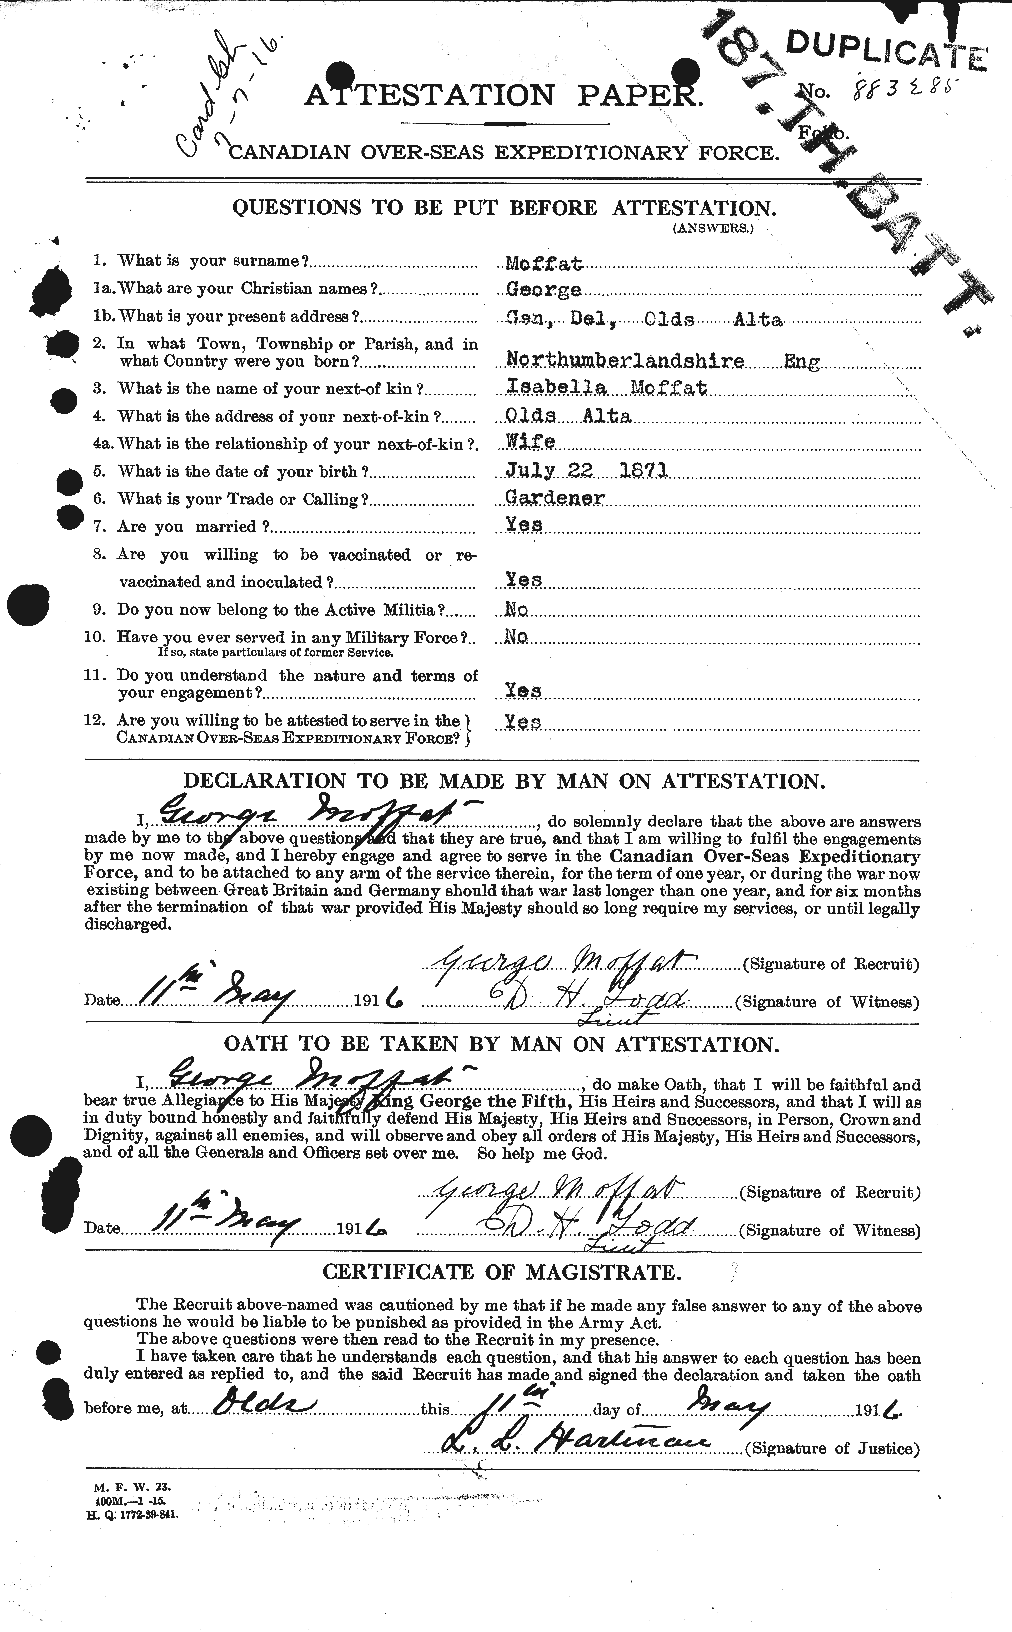 Personnel Records of the First World War - CEF 499017a